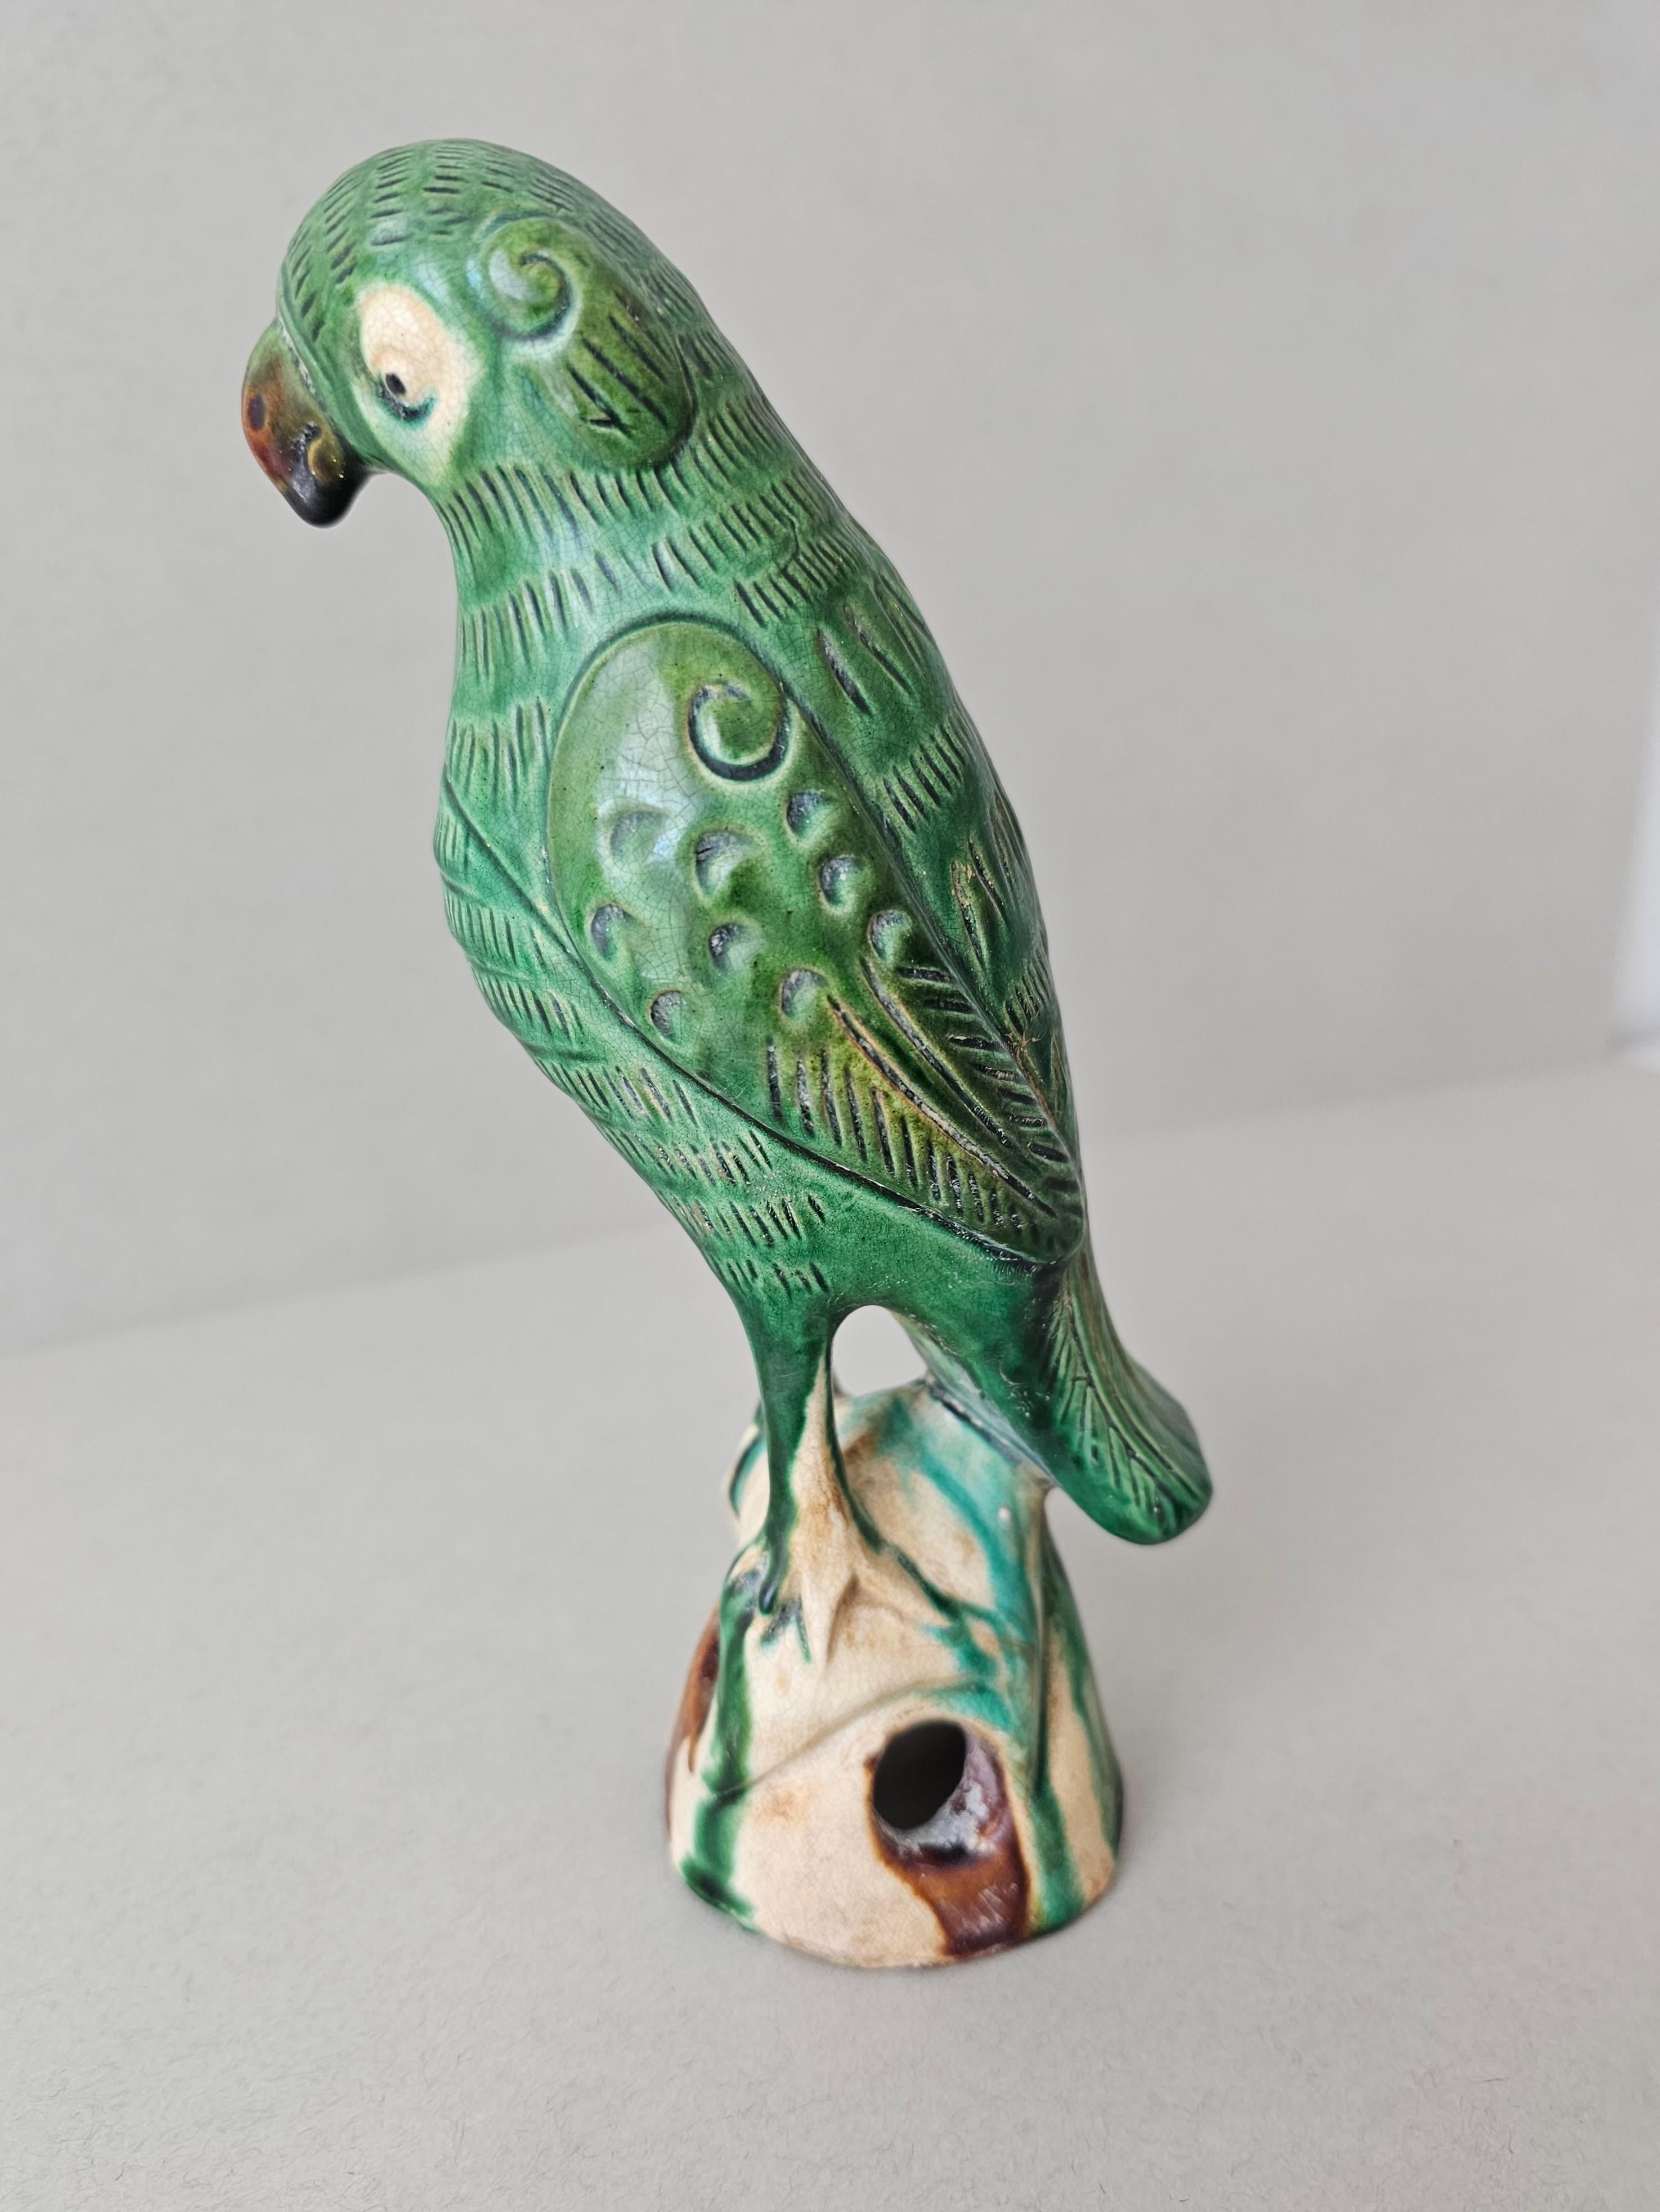 A charming Qing Dynasty (1636-1912) Chinese Sancai glazed pottery bird incense burner, 19th century, China, figural parrot form statue standing on rocky splash-glazed pierced base, small hole in back intended to hold incense stick. 

A wonderful